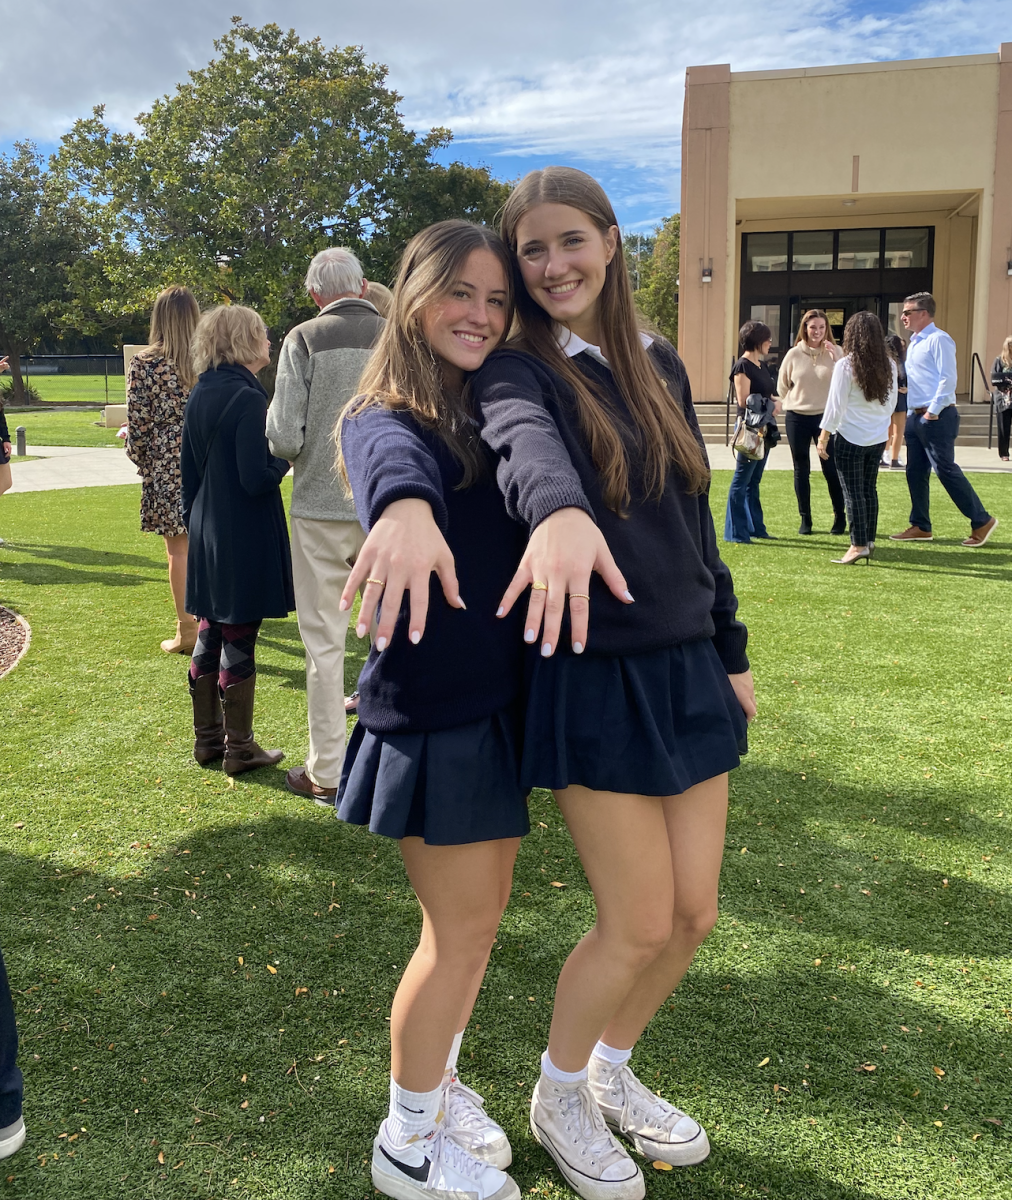 Juniors Ava Baldi and Tessa Turiello show off their newly blessed rings.